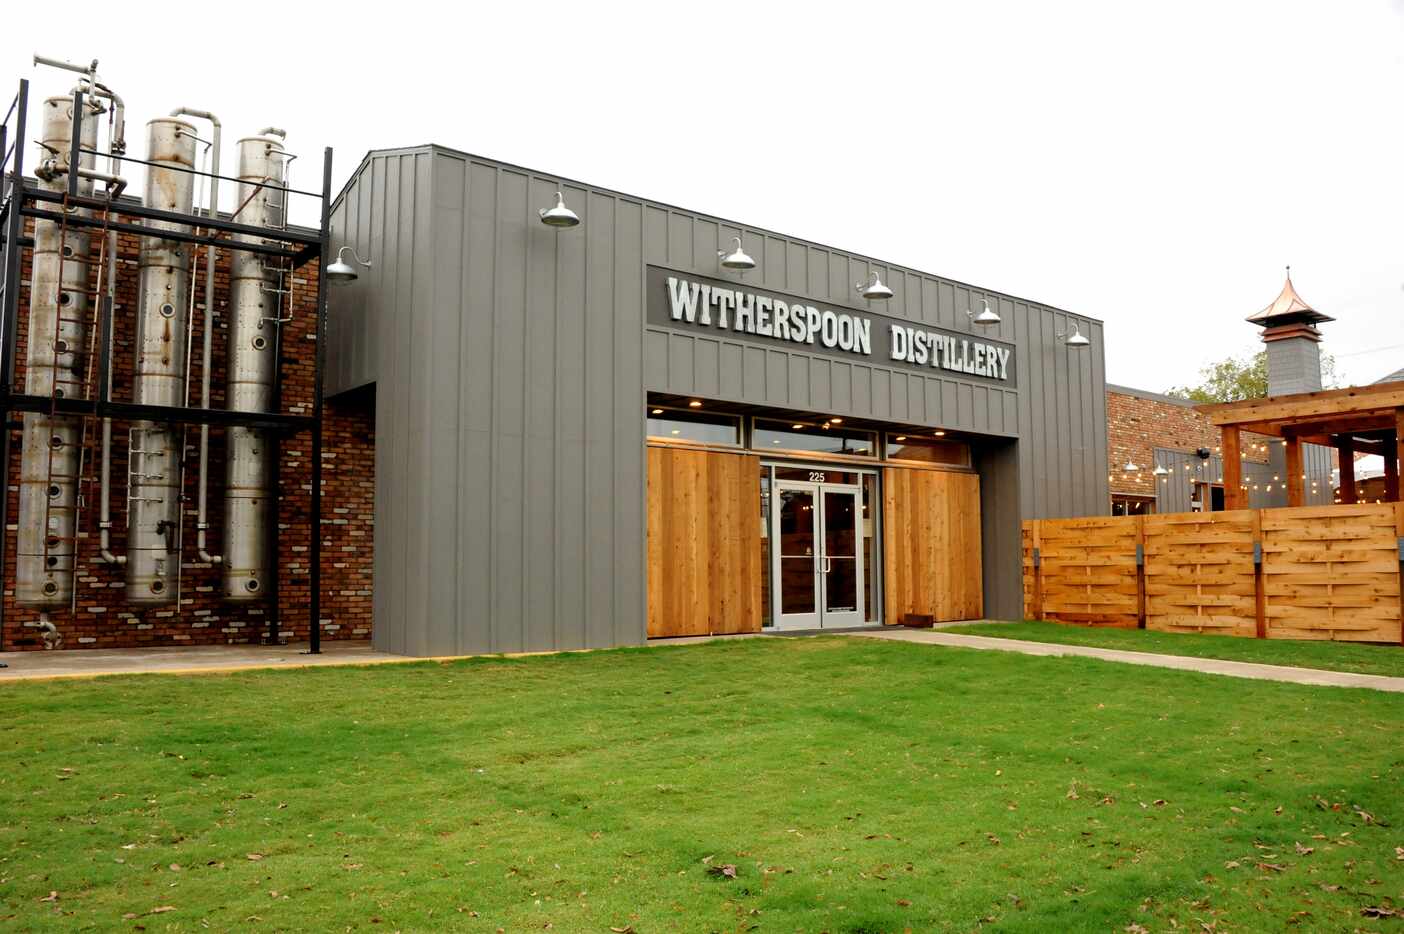 Witherspoon Distillery is now open and is located in Lewisville, TX on October 24, 2015. 